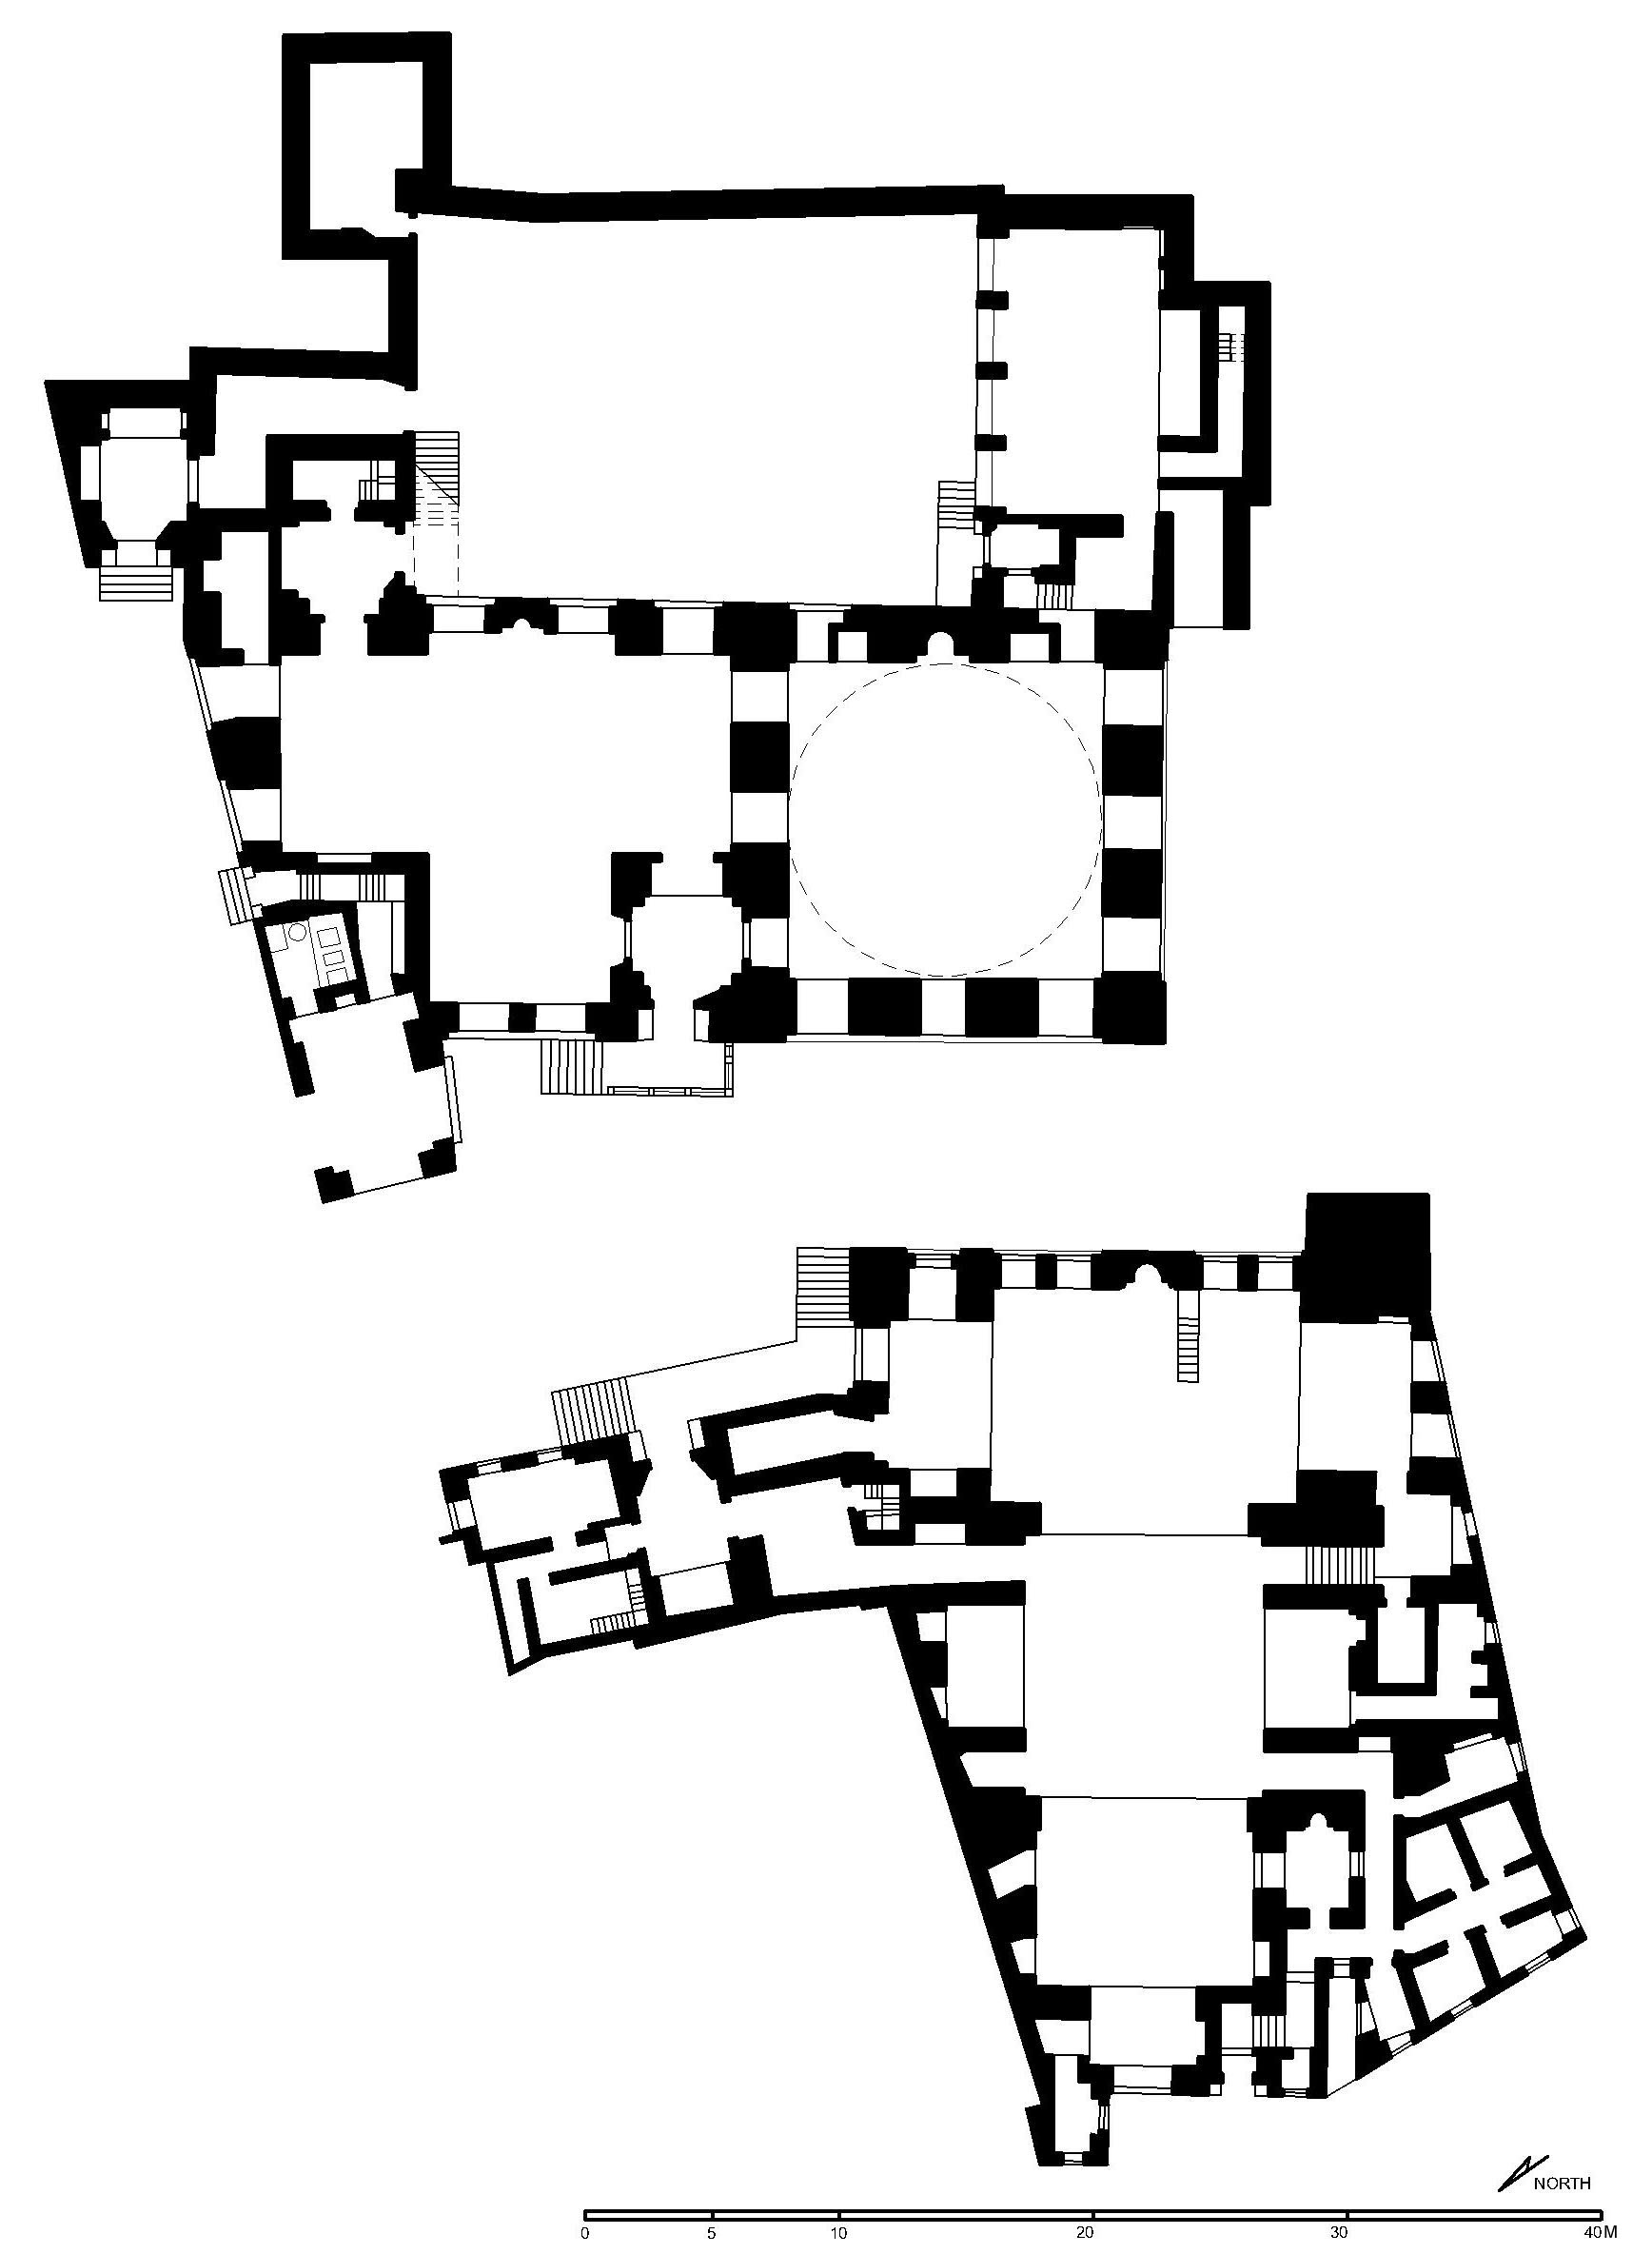 Funerary Complex of Sultan Qansuh al-Ghuri - Floor plan of complex (after Meinecke) in AutoCAD 2000 format. Click the download button to download a zipped file containing the .dwg file.